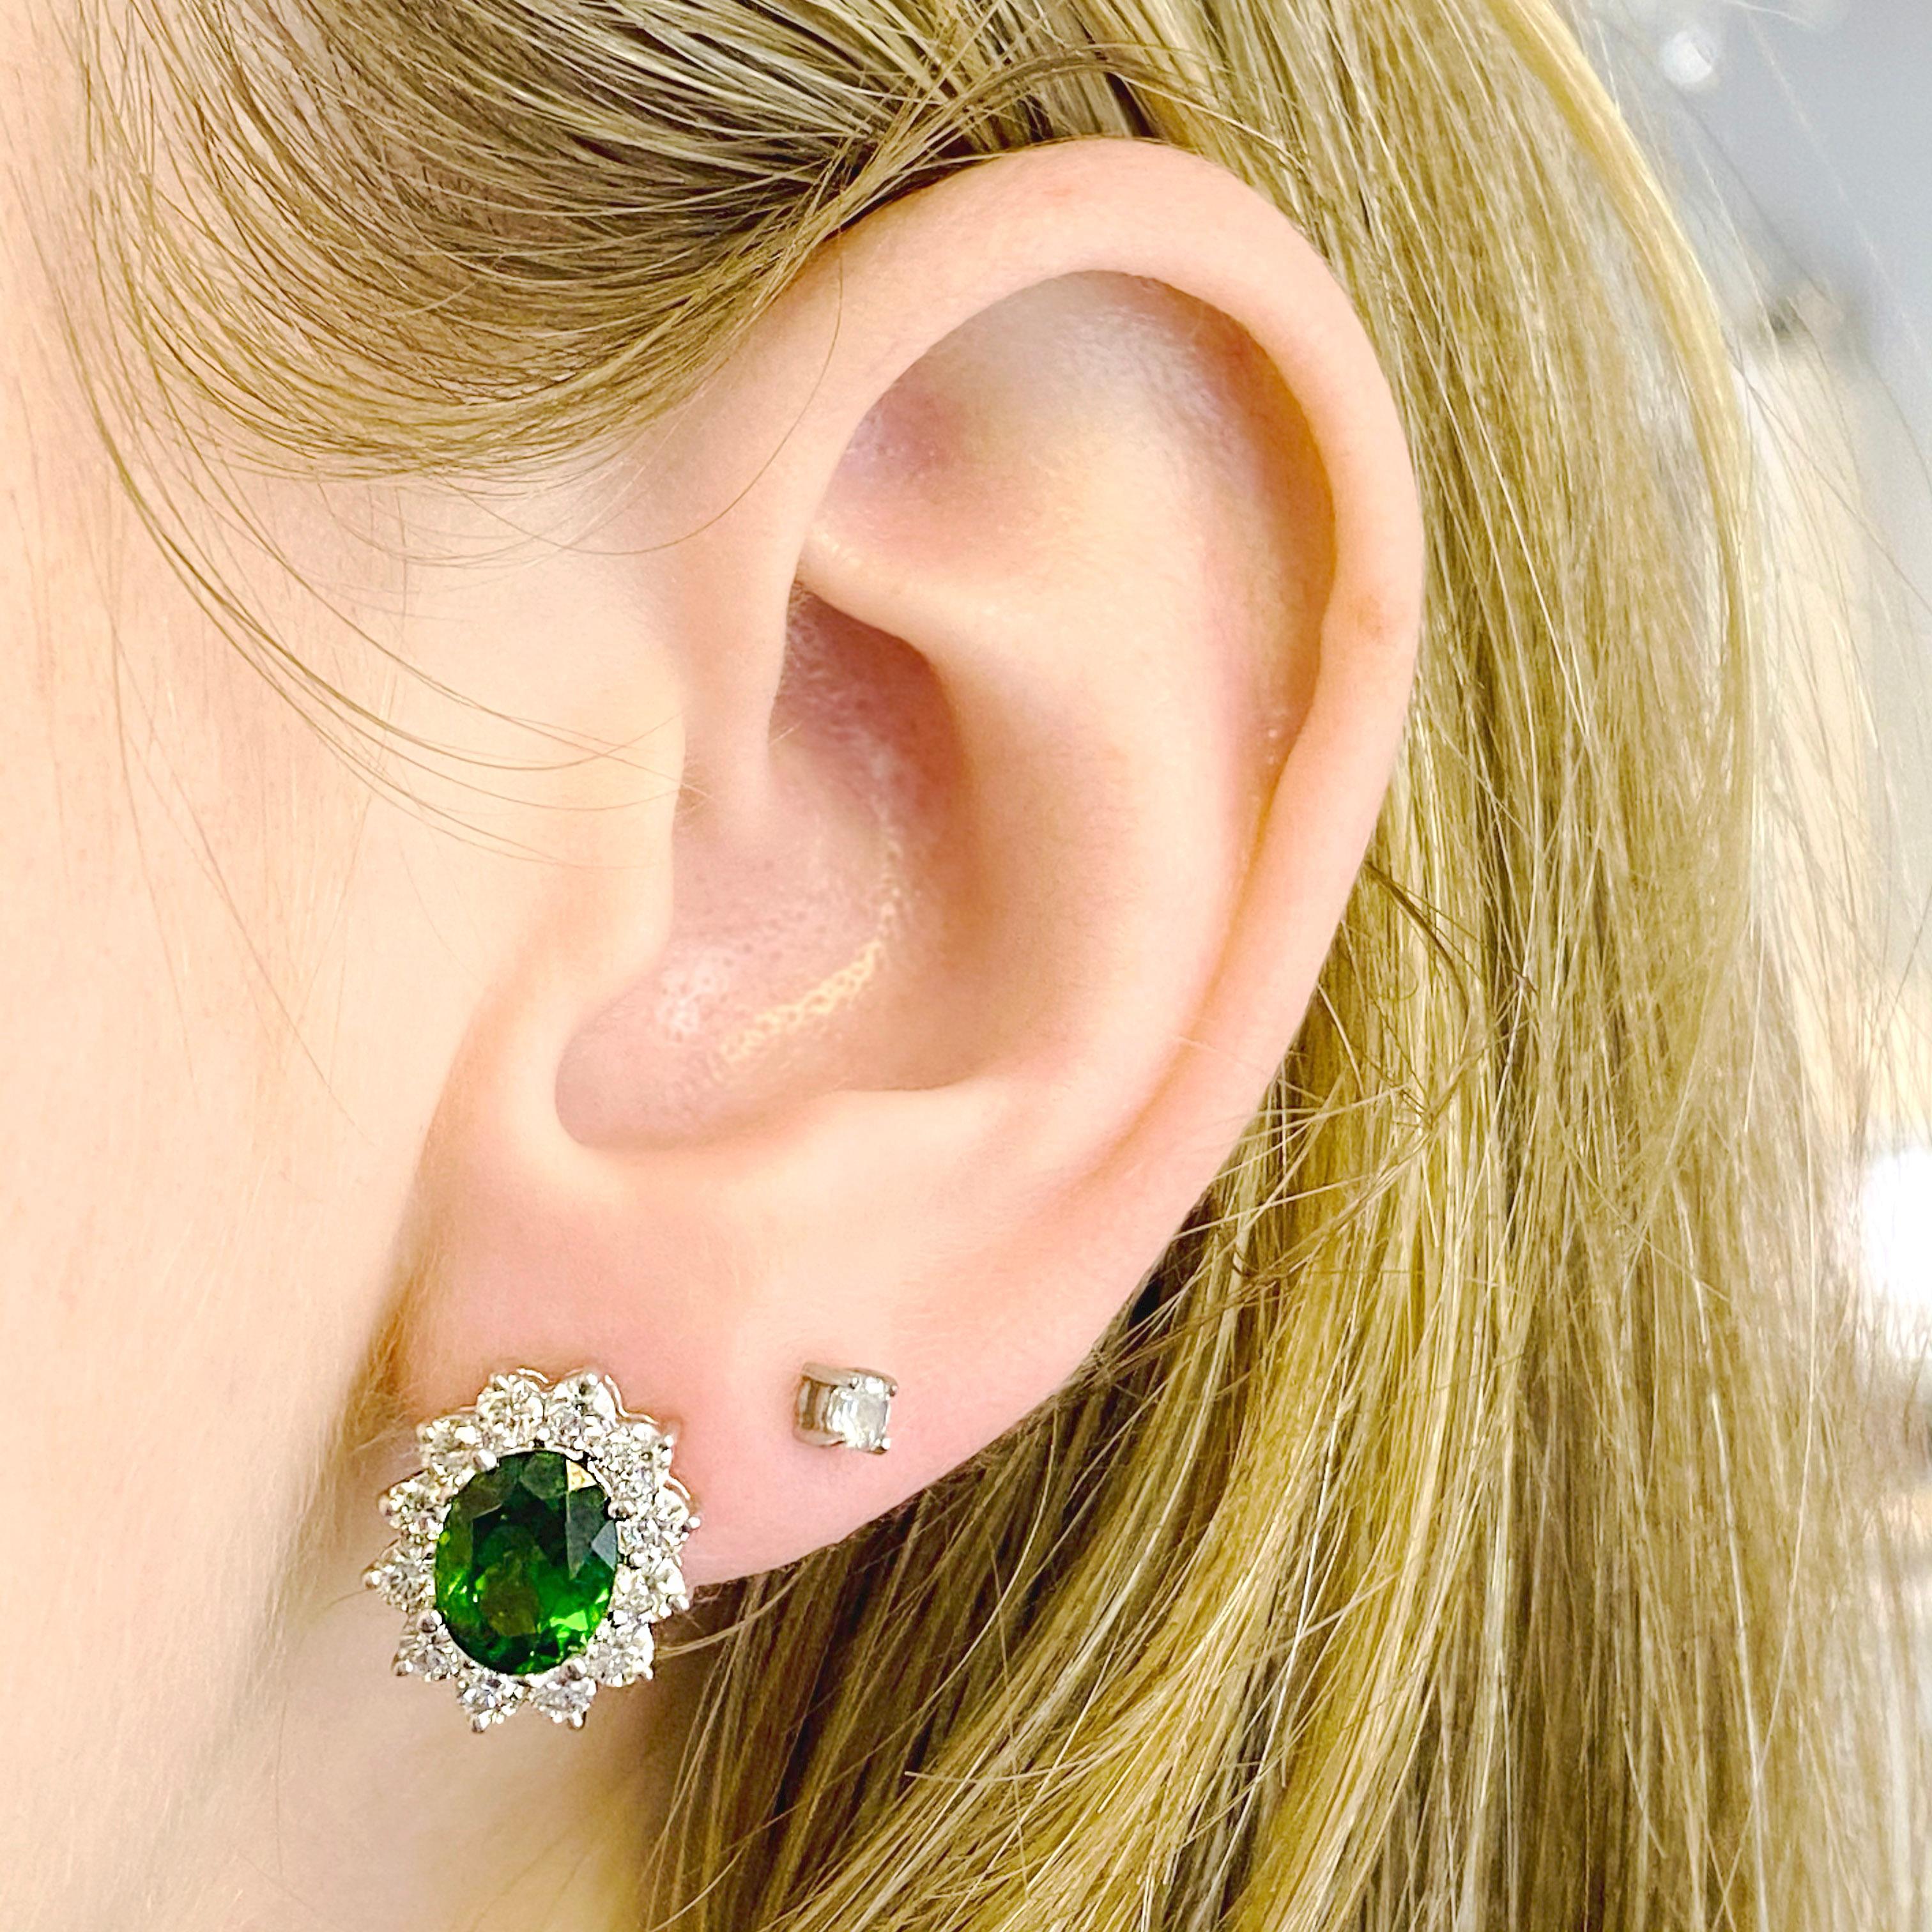 These pristine earrings have amazing quality.  The Russalite is a rich green color and the diamonds going around the cushion shaped stone is perfect. Russalite is a natural genuine gemstone that is mined in Siberia.  It has not be treated and is a